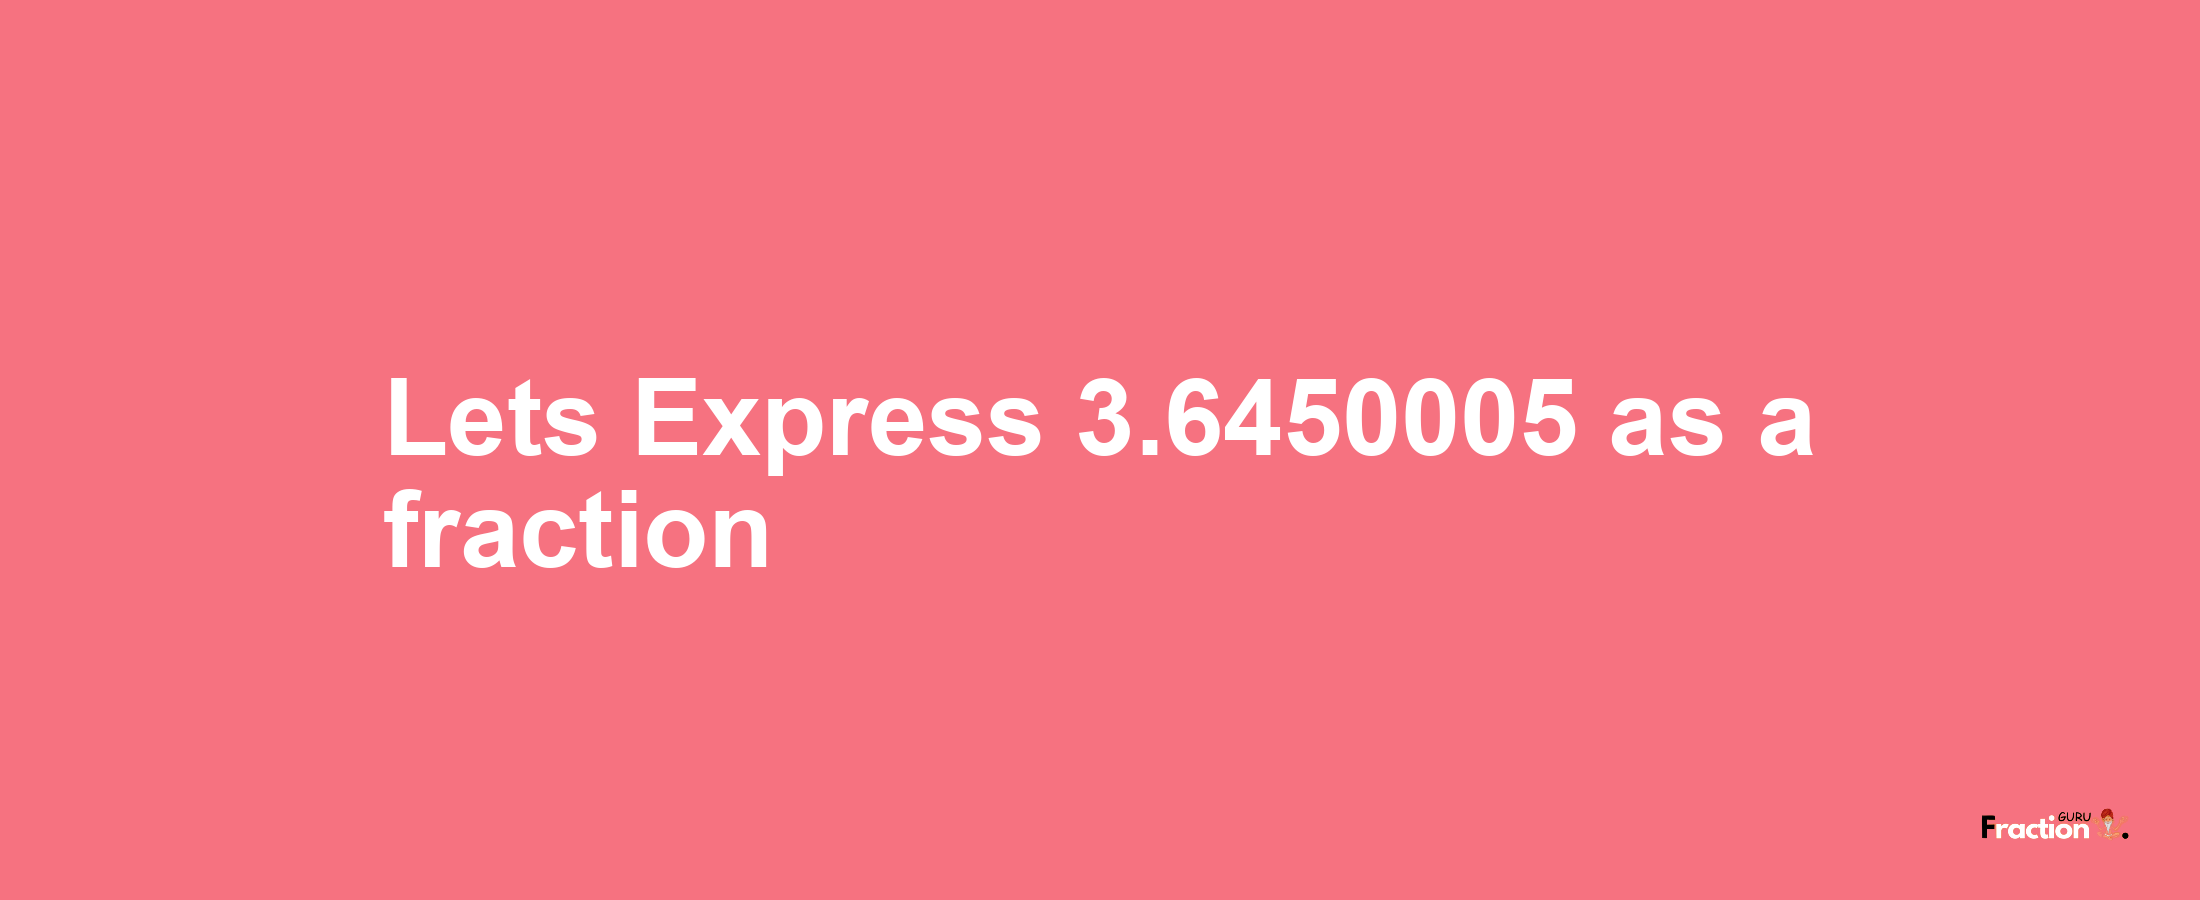 Lets Express 3.6450005 as afraction